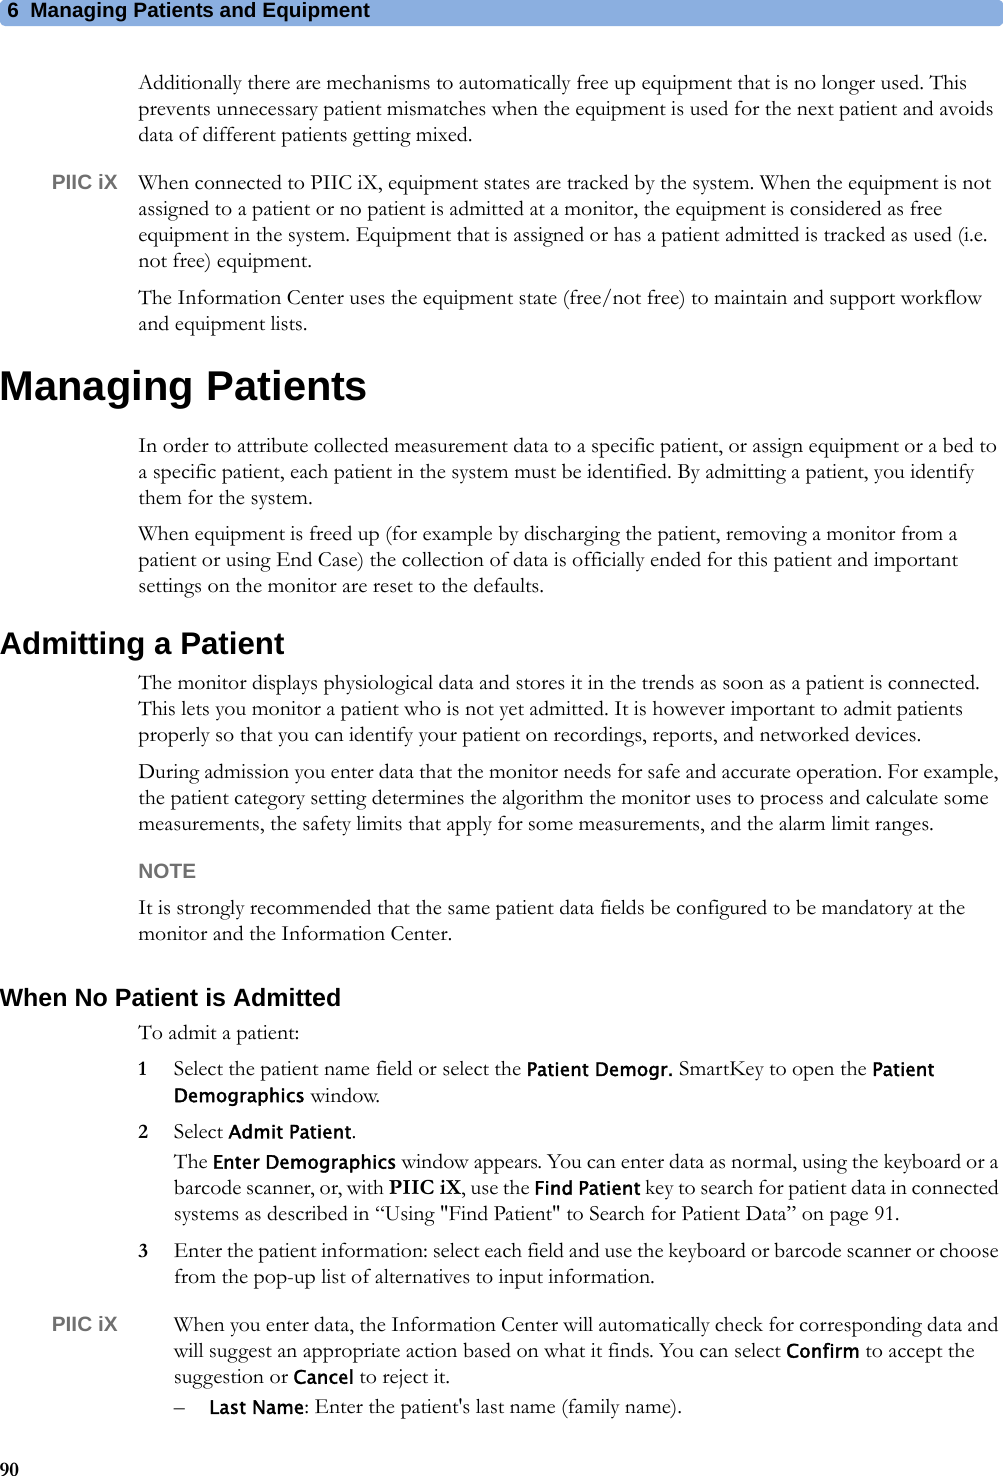 6 Managing Patients and Equipment90Additionally there are mechanisms to automatically free up equipment that is no longer used. This prevents unnecessary patient mismatches when the equipment is used for the next patient and avoids data of different patients getting mixed.PIIC iX When connected to PIIC iX, equipment states are tracked by the system. When the equipment is not assigned to a patient or no patient is admitted at a monitor, the equipment is considered as free equipment in the system. Equipment that is assigned or has a patient admitted is tracked as used (i.e. not free) equipment.The Information Center uses the equipment state (free/not free) to maintain and support workflow and equipment lists.Managing PatientsIn order to attribute collected measurement data to a specific patient, or assign equipment or a bed to a specific patient, each patient in the system must be identified. By admitting a patient, you identify them for the system.When equipment is freed up (for example by discharging the patient, removing a monitor from a patient or using End Case) the collection of data is officially ended for this patient and important settings on the monitor are reset to the defaults.Admitting a PatientThe monitor displays physiological data and stores it in the trends as soon as a patient is connected. This lets you monitor a patient who is not yet admitted. It is however important to admit patients properly so that you can identify your patient on recordings, reports, and networked devices.During admission you enter data that the monitor needs for safe and accurate operation. For example, the patient category setting determines the algorithm the monitor uses to process and calculate some measurements, the safety limits that apply for some measurements, and the alarm limit ranges.NOTEIt is strongly recommended that the same patient data fields be configured to be mandatory at the monitor and the Information Center.When No Patient is AdmittedTo admit a patient:1Select the patient name field or select the Patient Demogr. SmartKey to open the Patient Demographics window.2Select Admit Patient.The Enter Demographics window appears. You can enter data as normal, using the keyboard or a barcode scanner, or, with PIIC iX, use the Find Patient key to search for patient data in connected systems as described in “Using &quot;Find Patient&quot; to Search for Patient Data” on page 91. 3Enter the patient information: select each field and use the keyboard or barcode scanner or choose from the pop-up list of alternatives to input information.PIIC iX When you enter data, the Information Center will automatically check for corresponding data and will suggest an appropriate action based on what it finds. You can select Confirm to accept the suggestion or Cancel to reject it.–Last Name: Enter the patient&apos;s last name (family name).